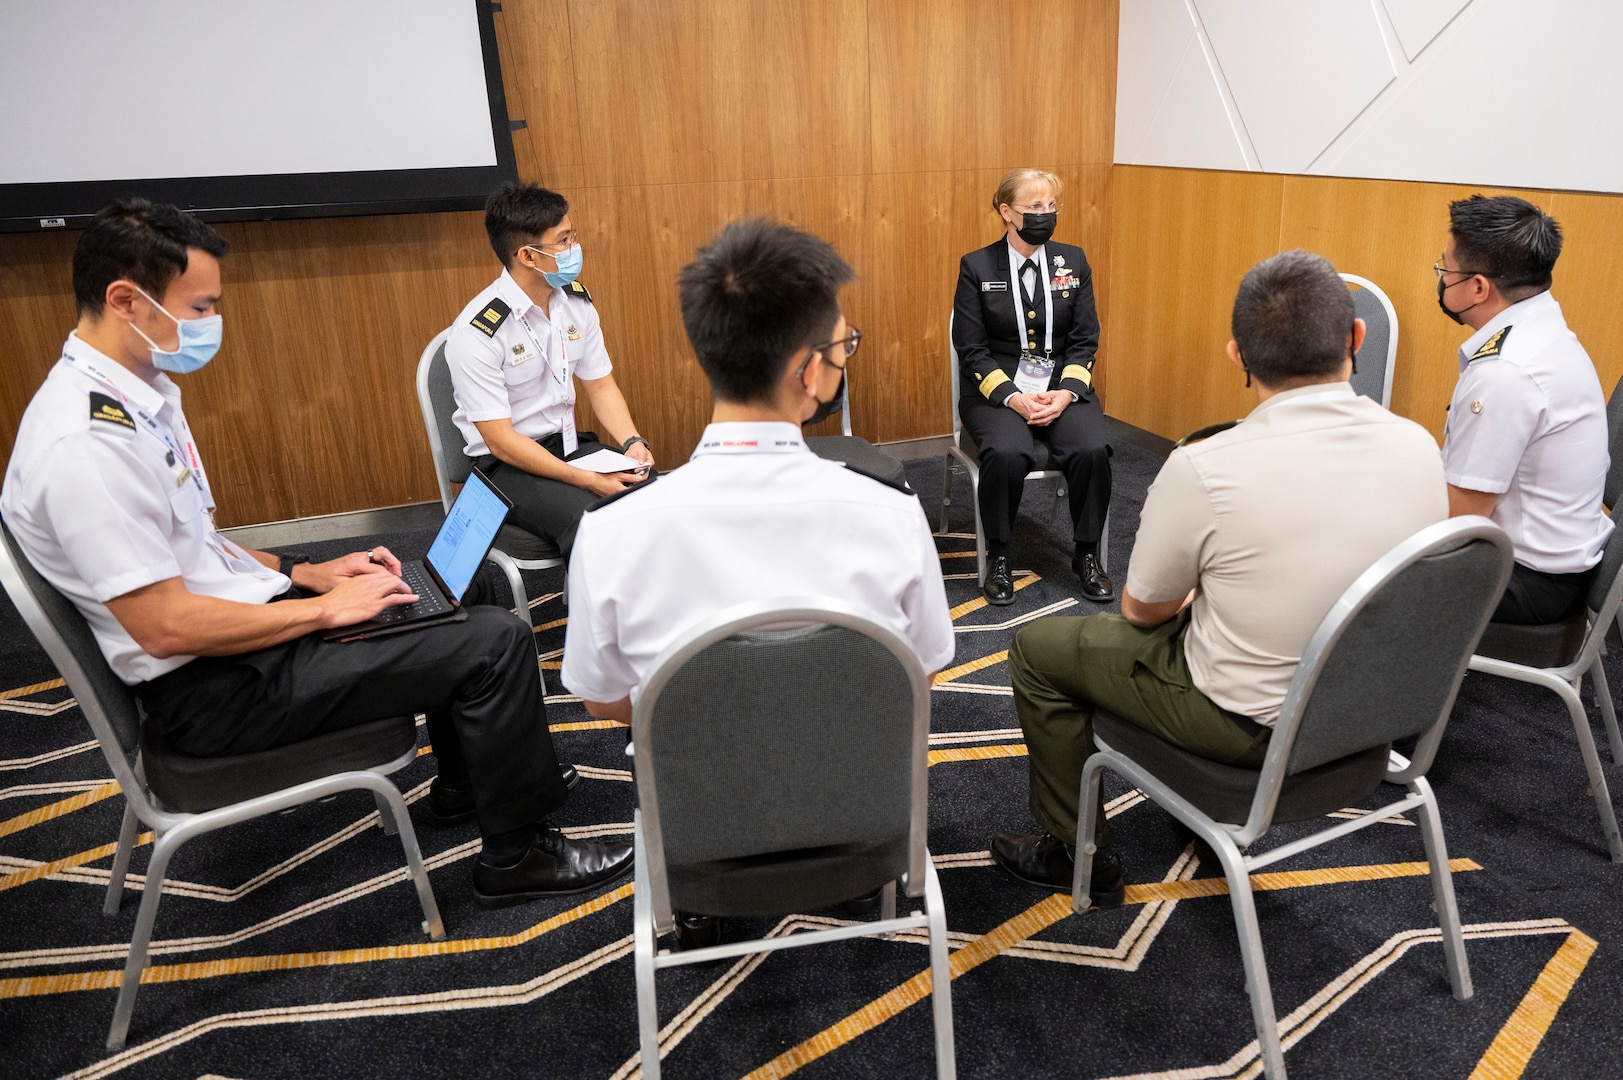 Rear Adm. Pamela Miller (rear-right), Command Surgeon for U.S. Indo-Pacific Command, speaks with delegates from Singapore during the second Military-Civilian Health Security Summit June 28, 2022, in Singapore. The summit, held June 27-28, focused on regional approaches to global health security through interagency cooperation with allies and partners.